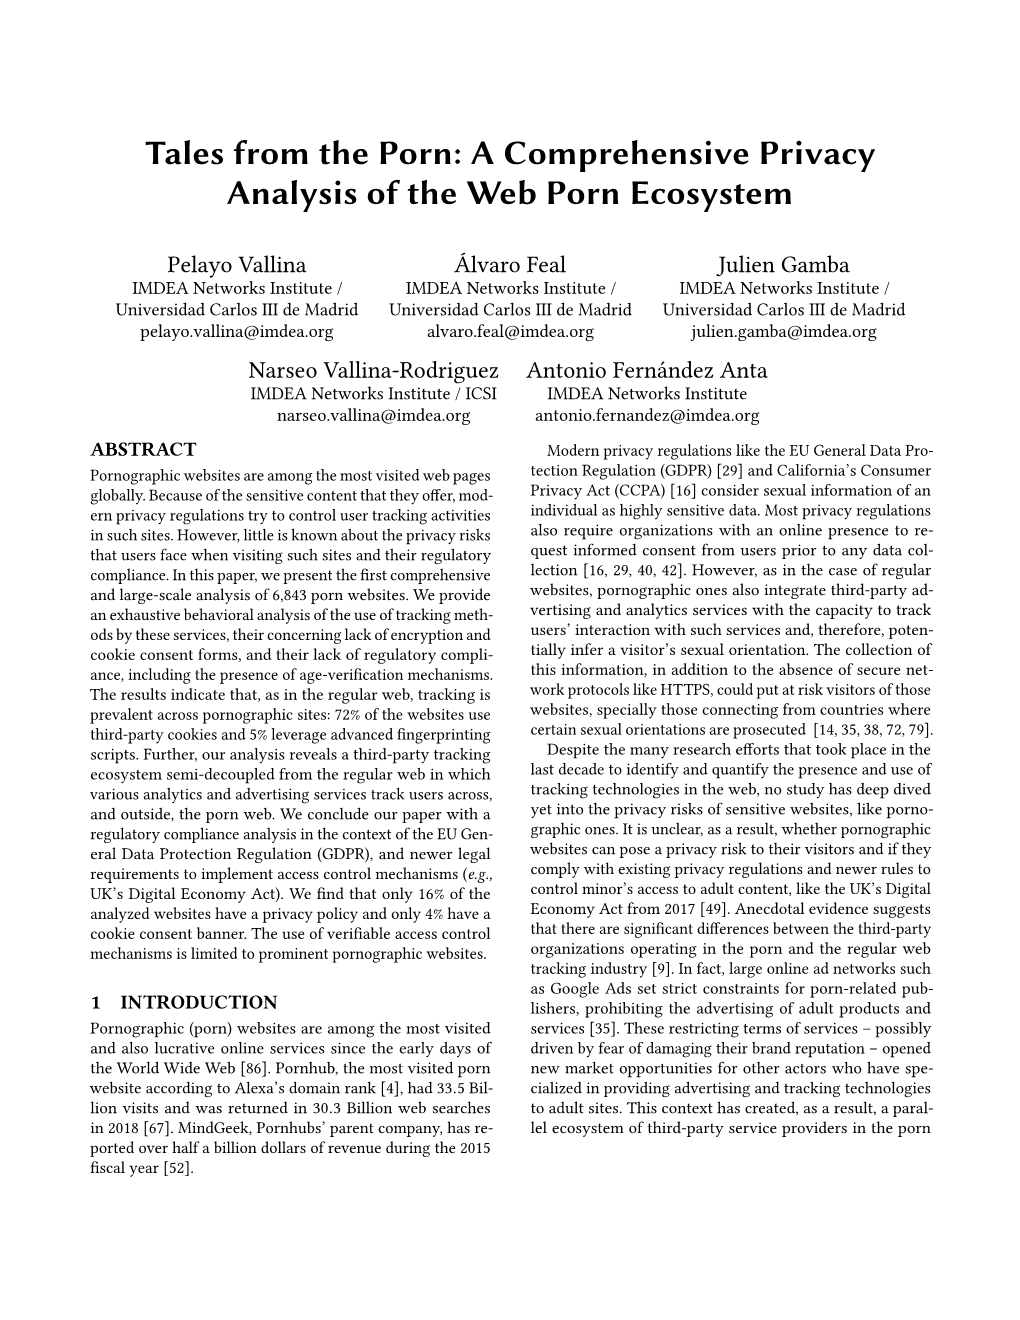 A Comprehensive Privacy Analysis of the Web Porn Ecosystem